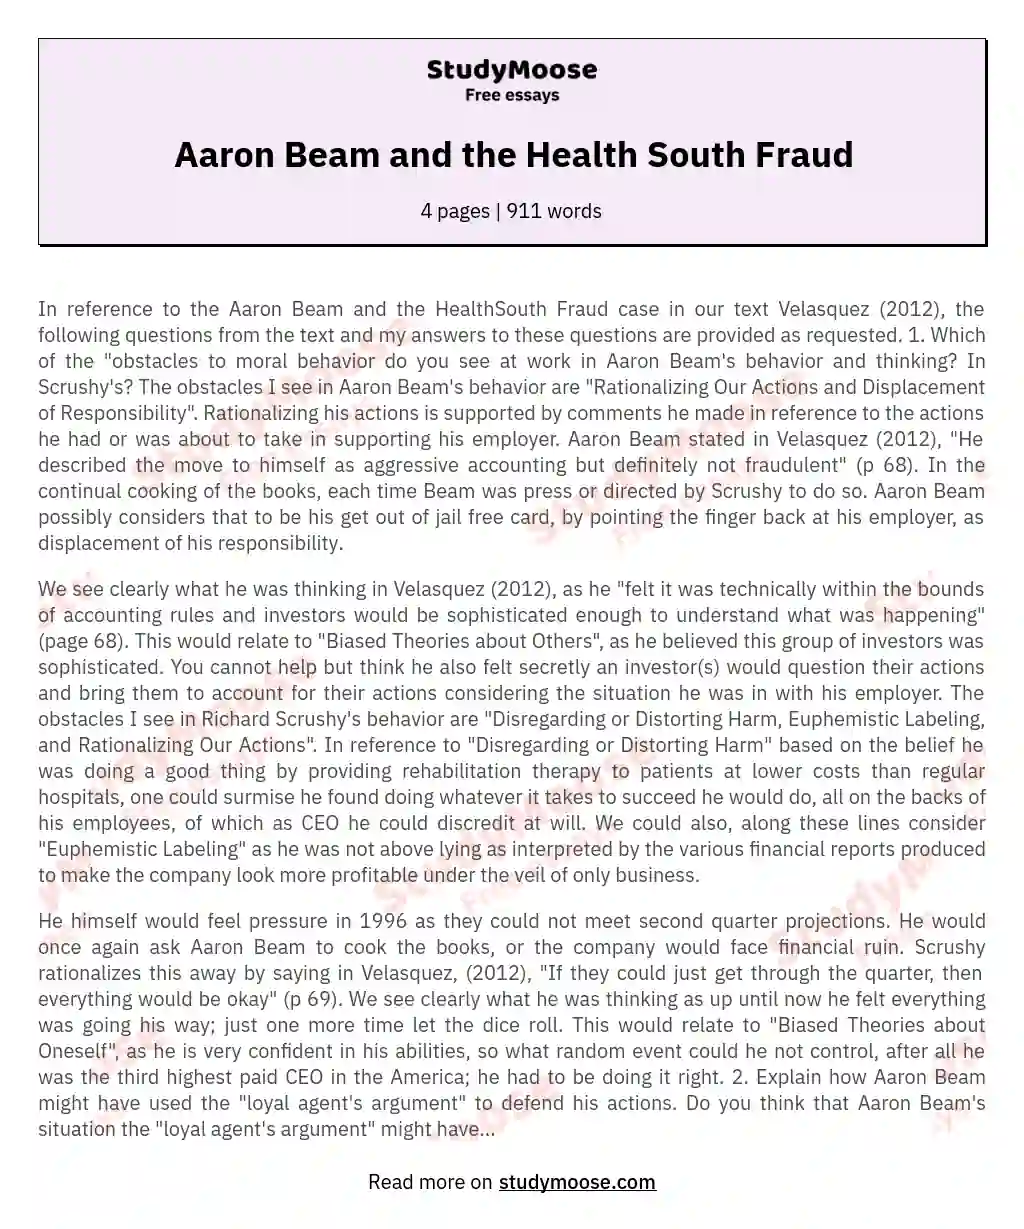 Aaron Beam and the Health South Fraud